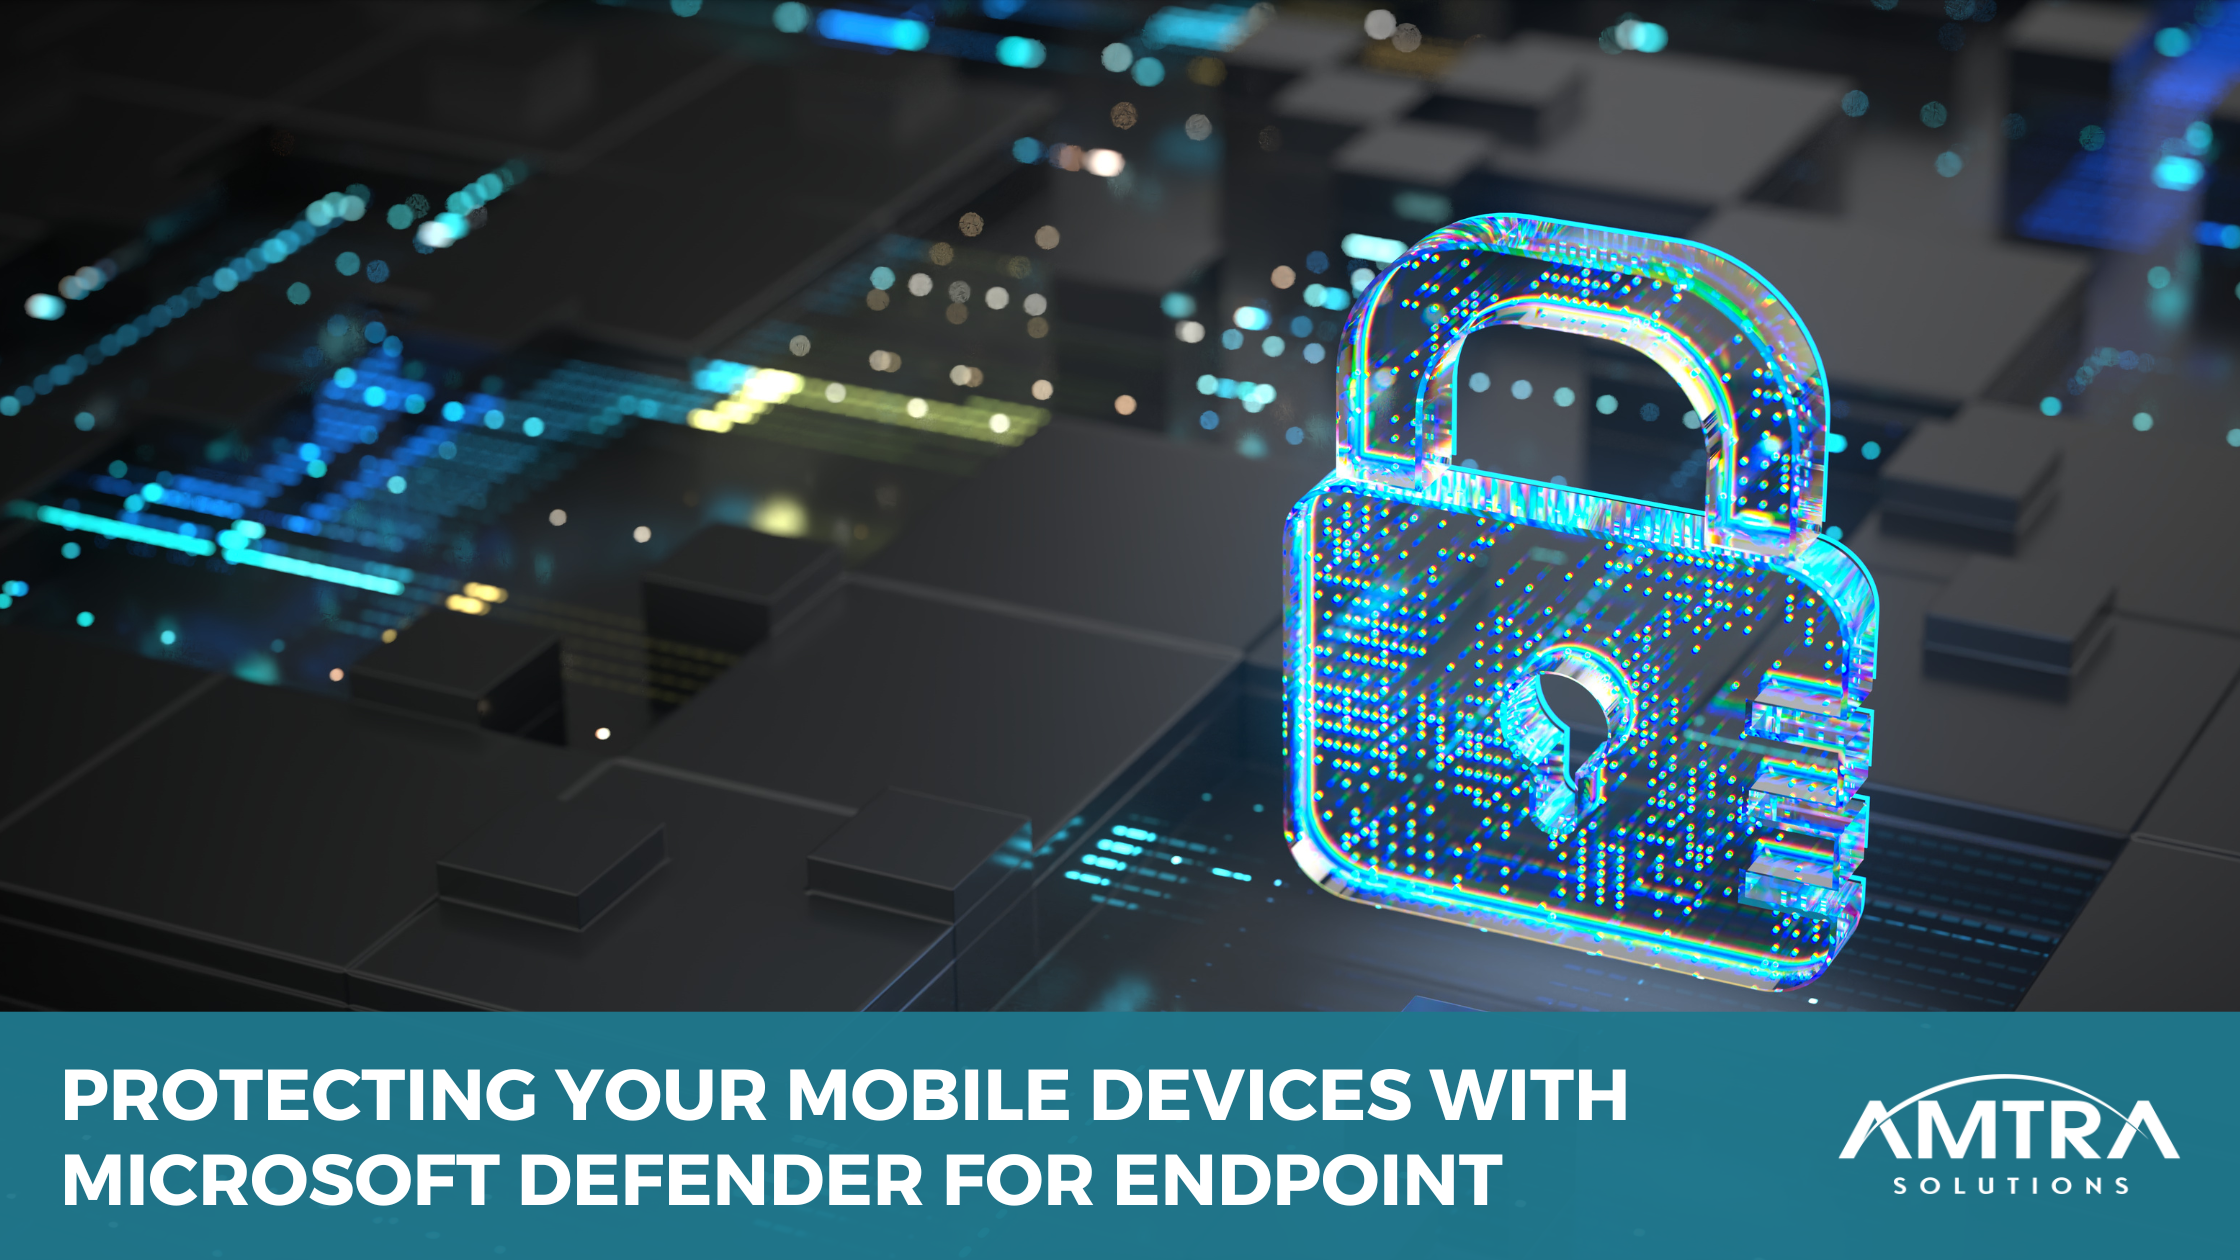 Protecting Your Mobile Devices with Microsoft Defender for Endpoint